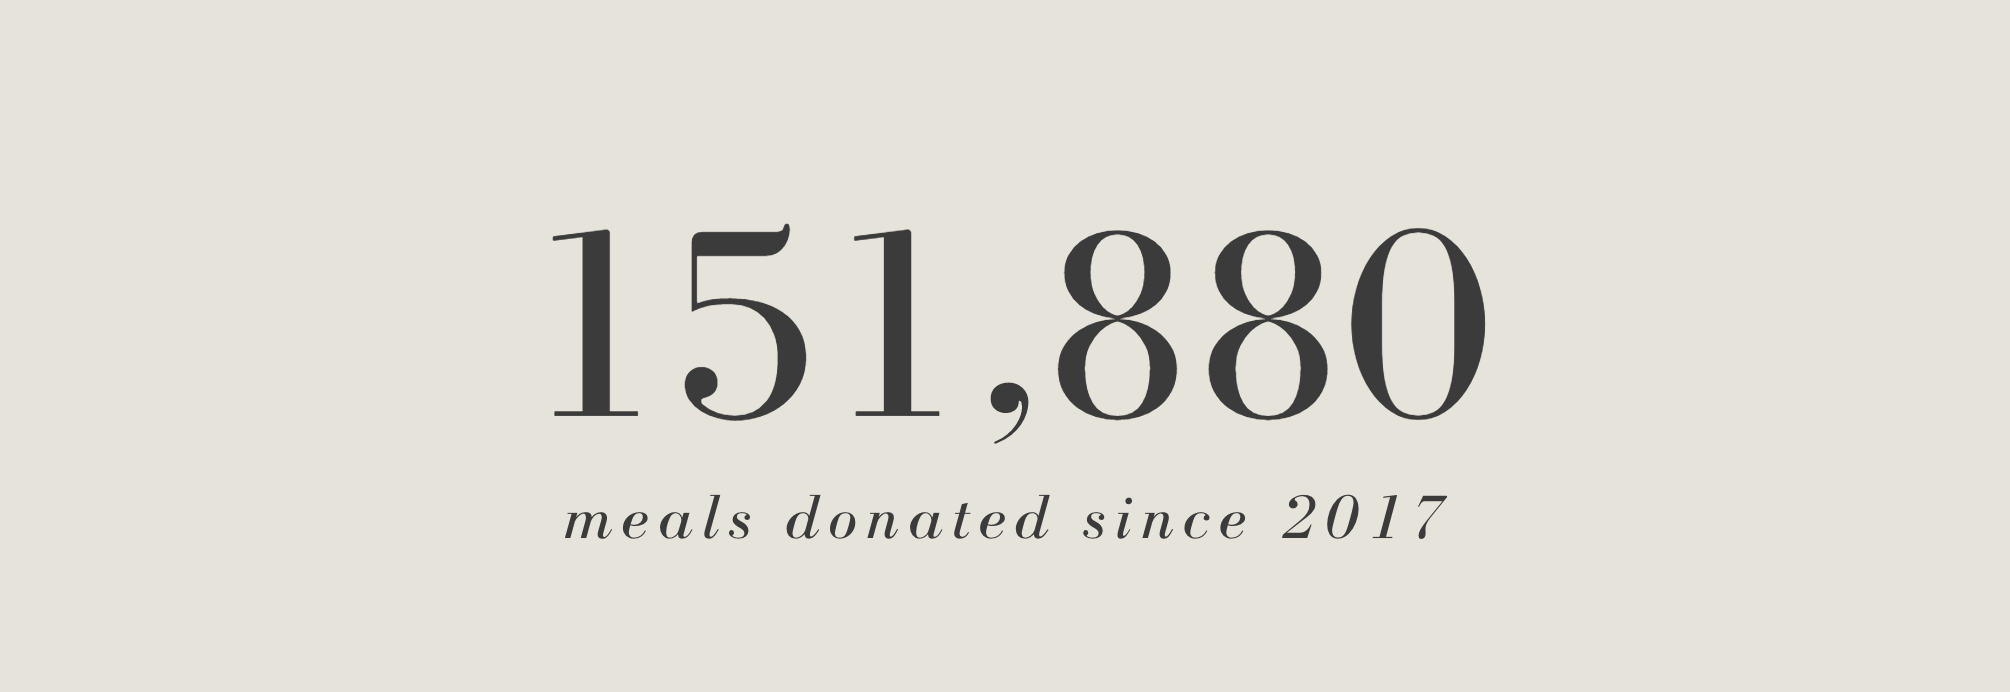 151,880 meals donated by Scoria World since 2017